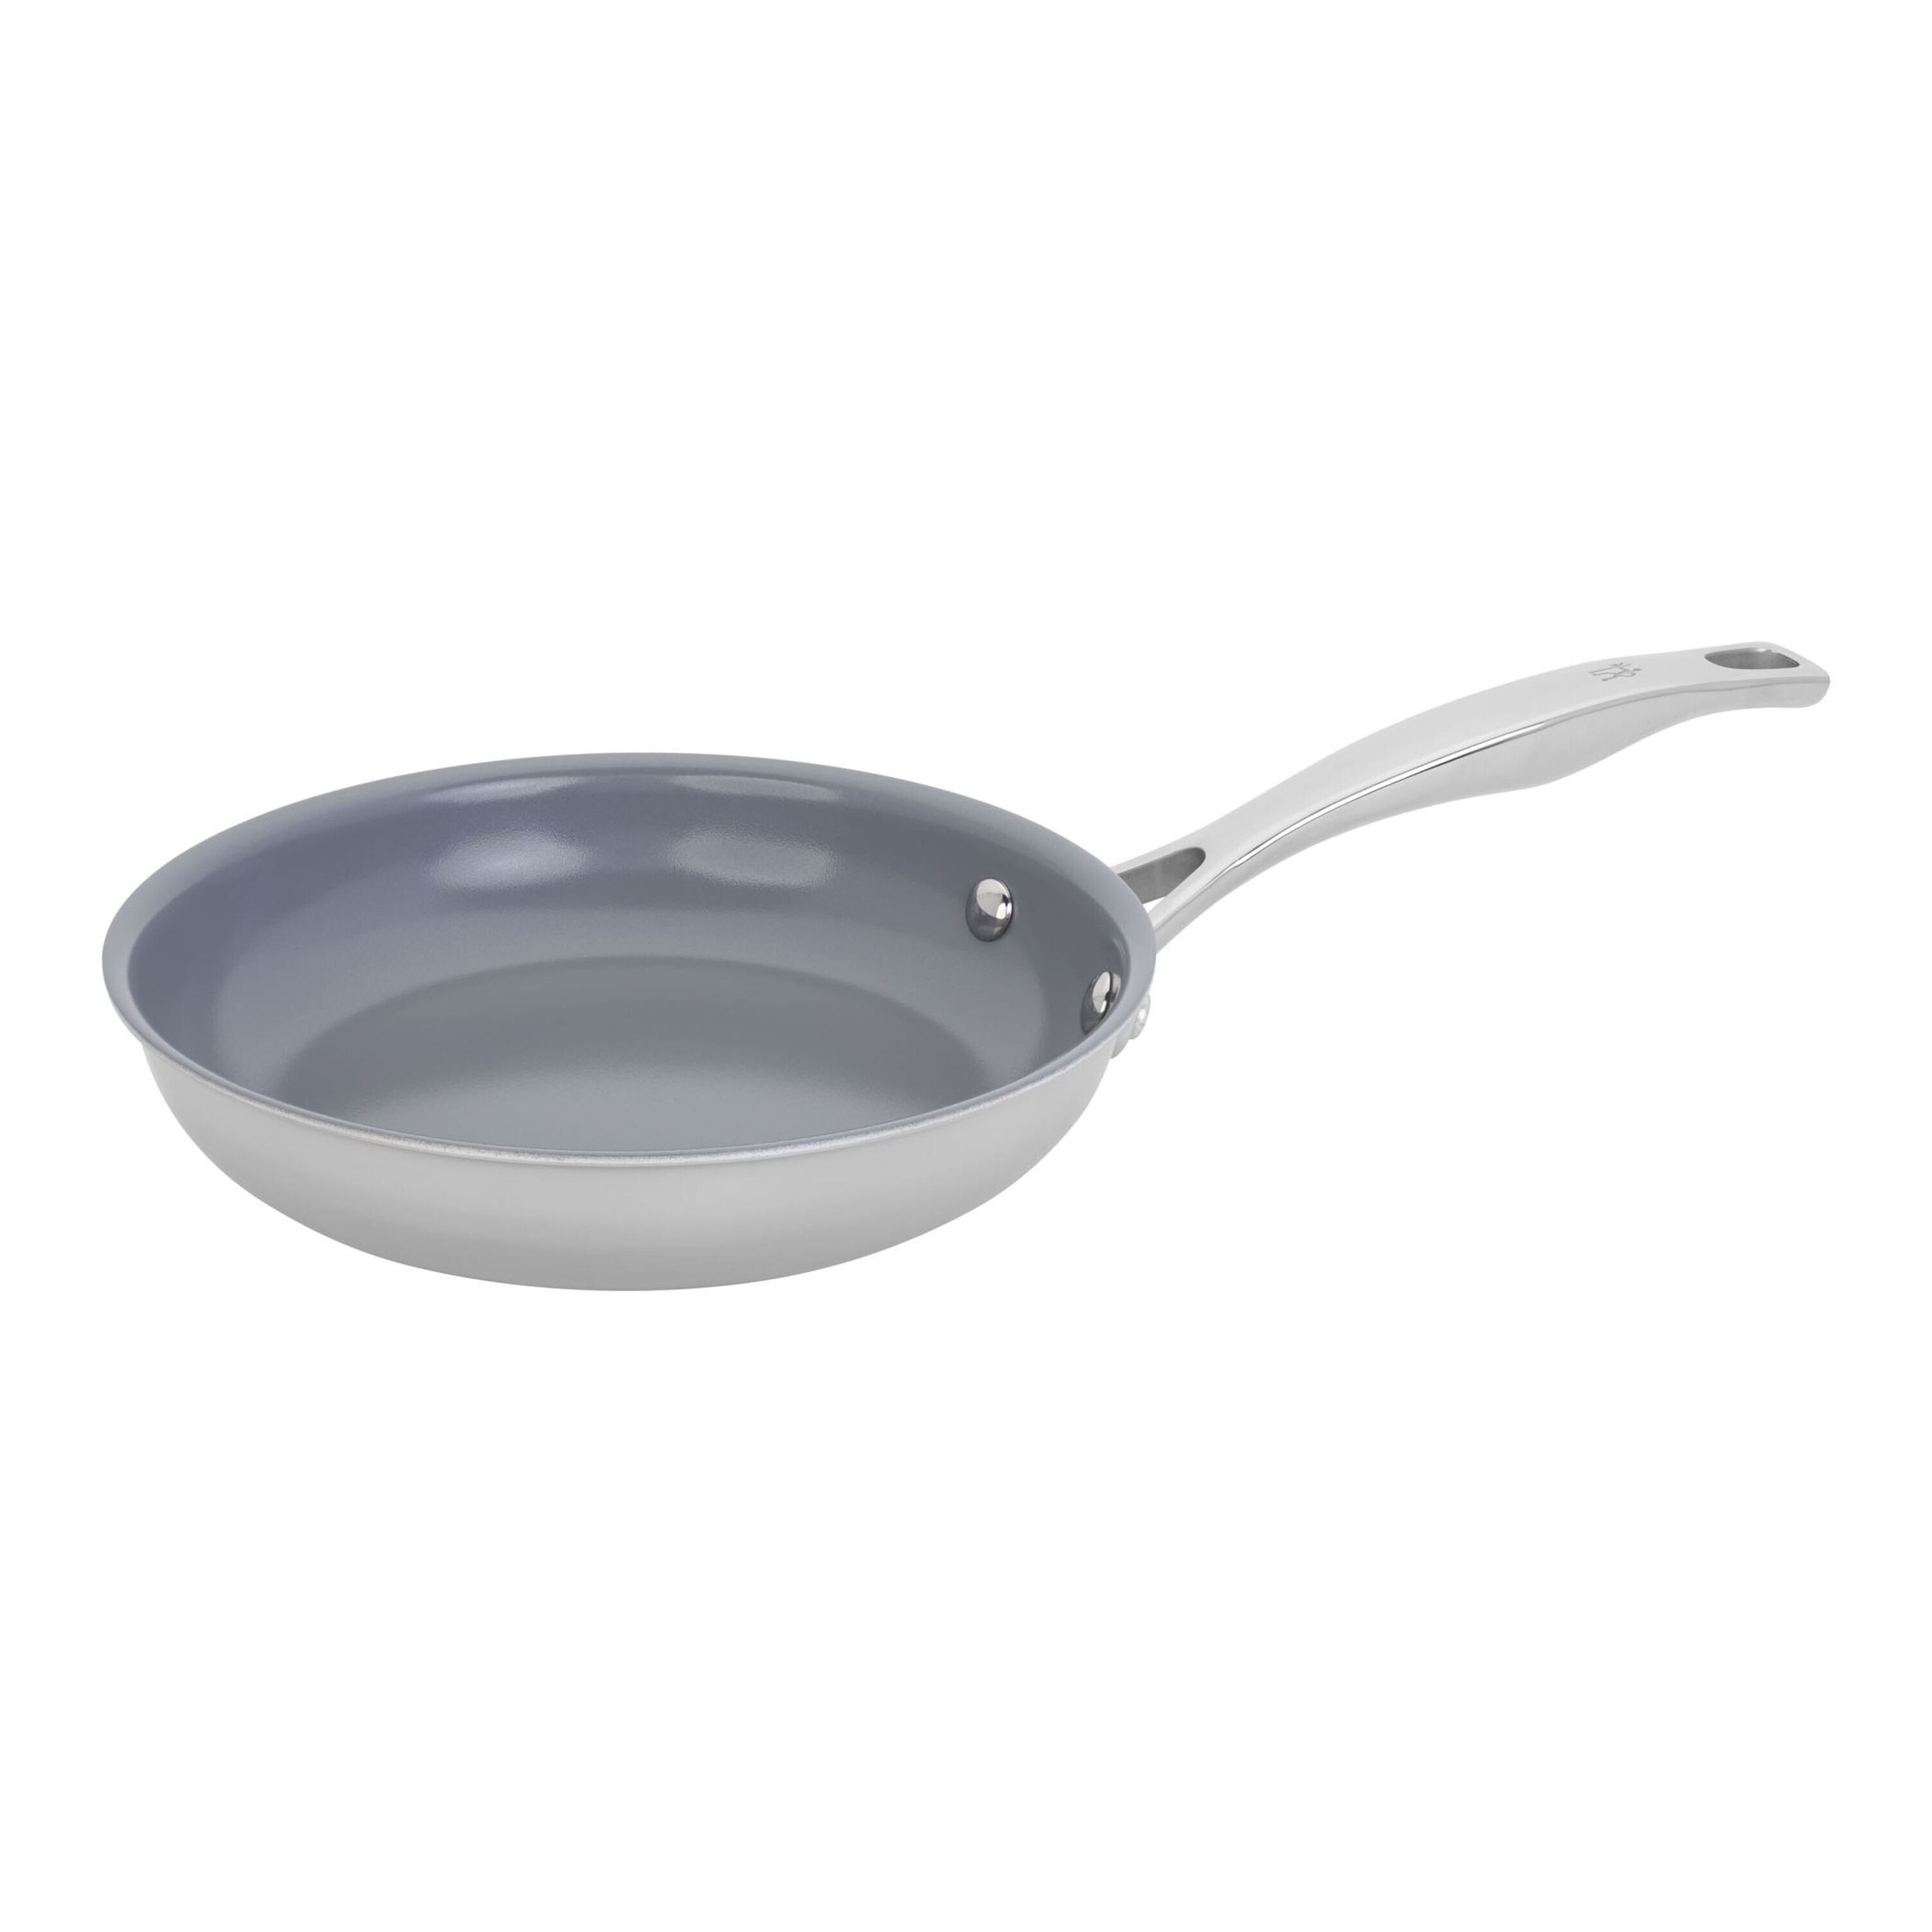 Henckels Clad H3 8-inch, stainless steel, Non-stick, Frying pan